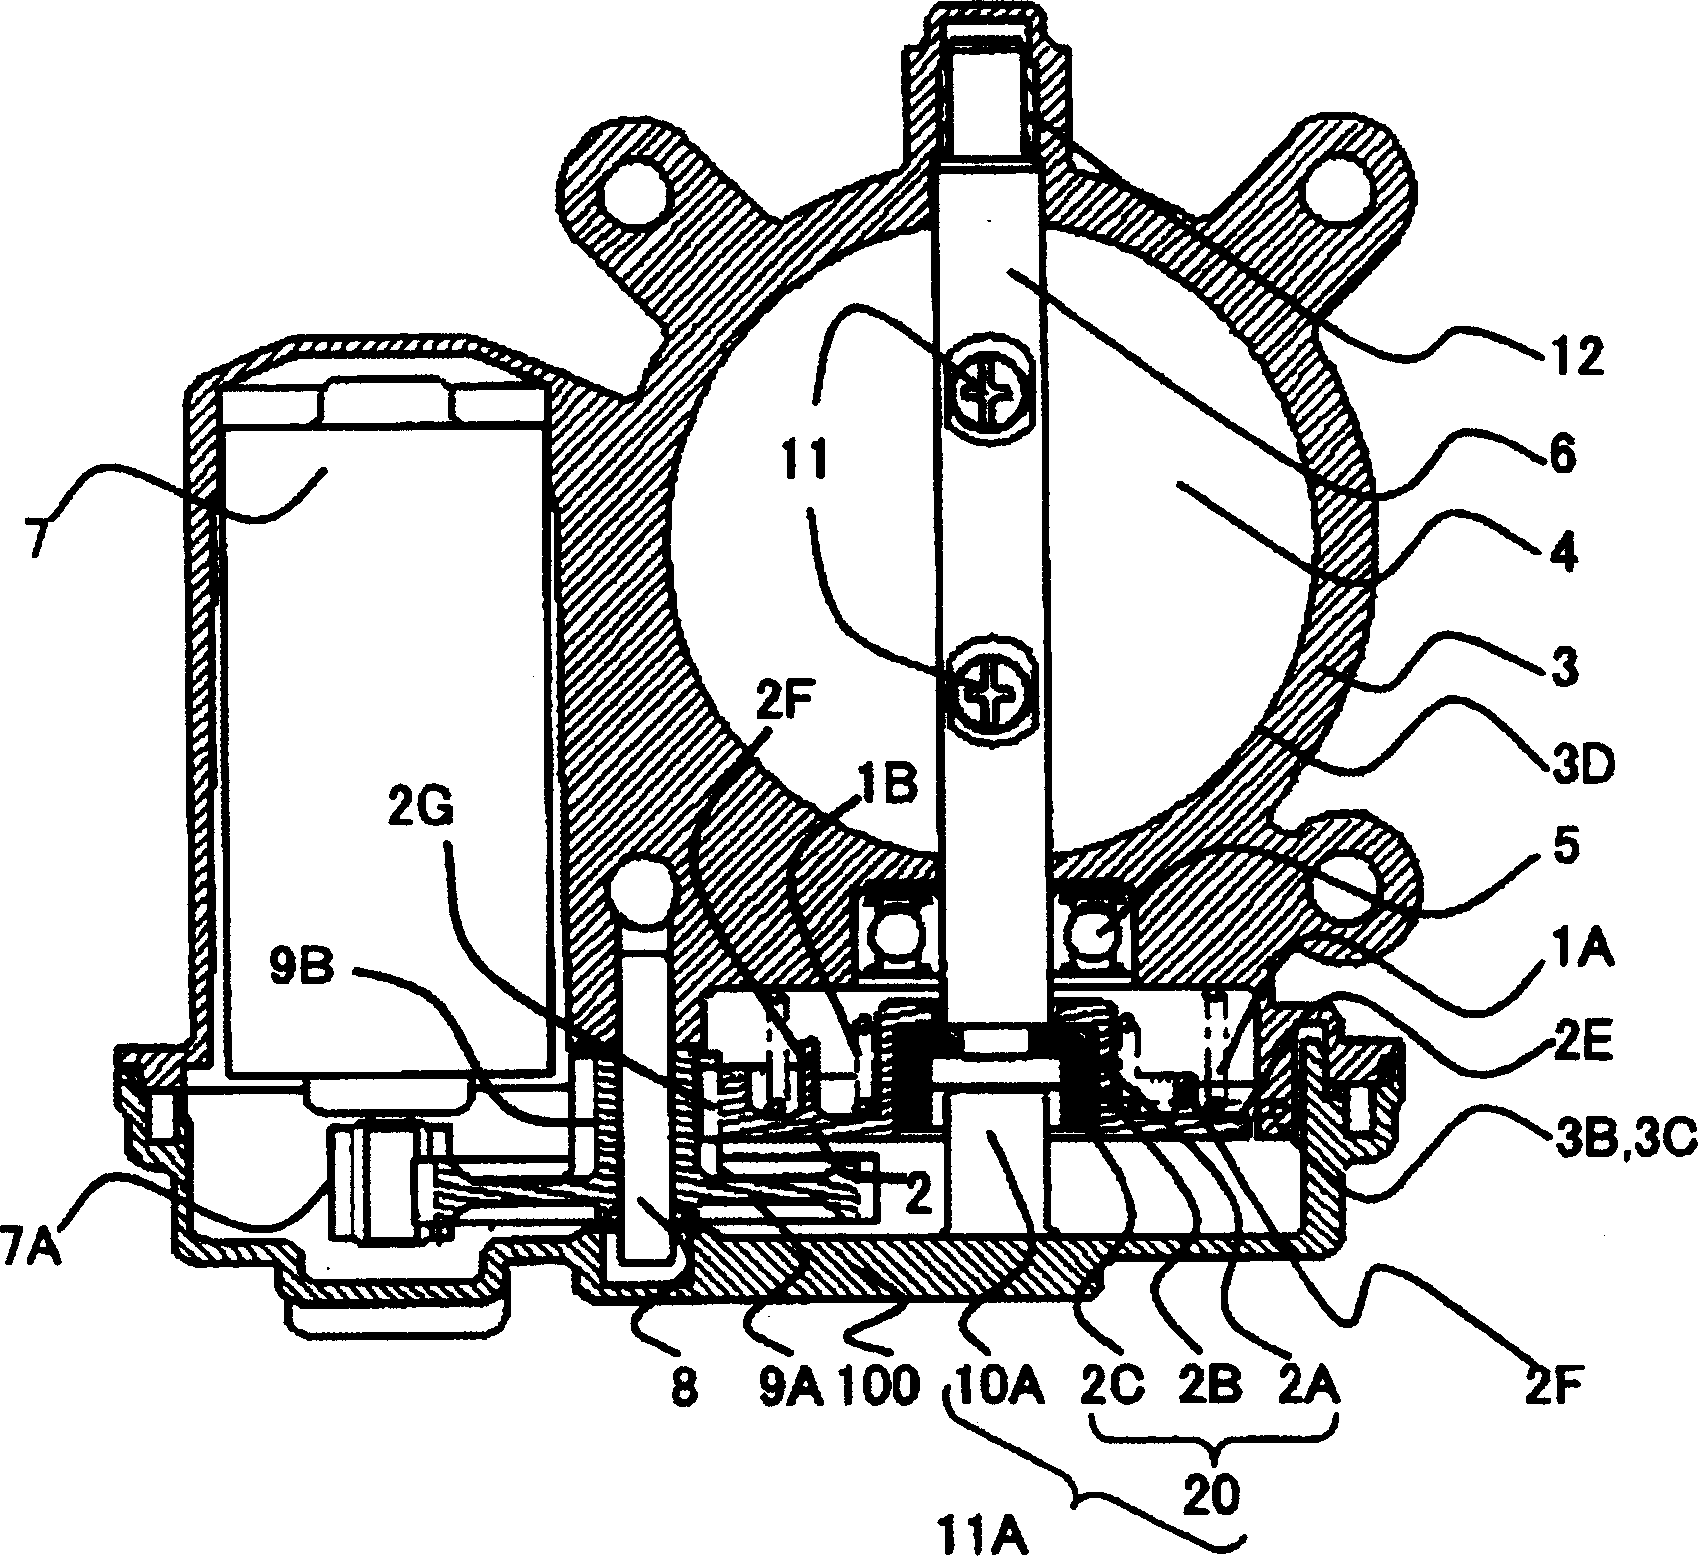 Motor-driven throttle valve control device for internal combustion engine